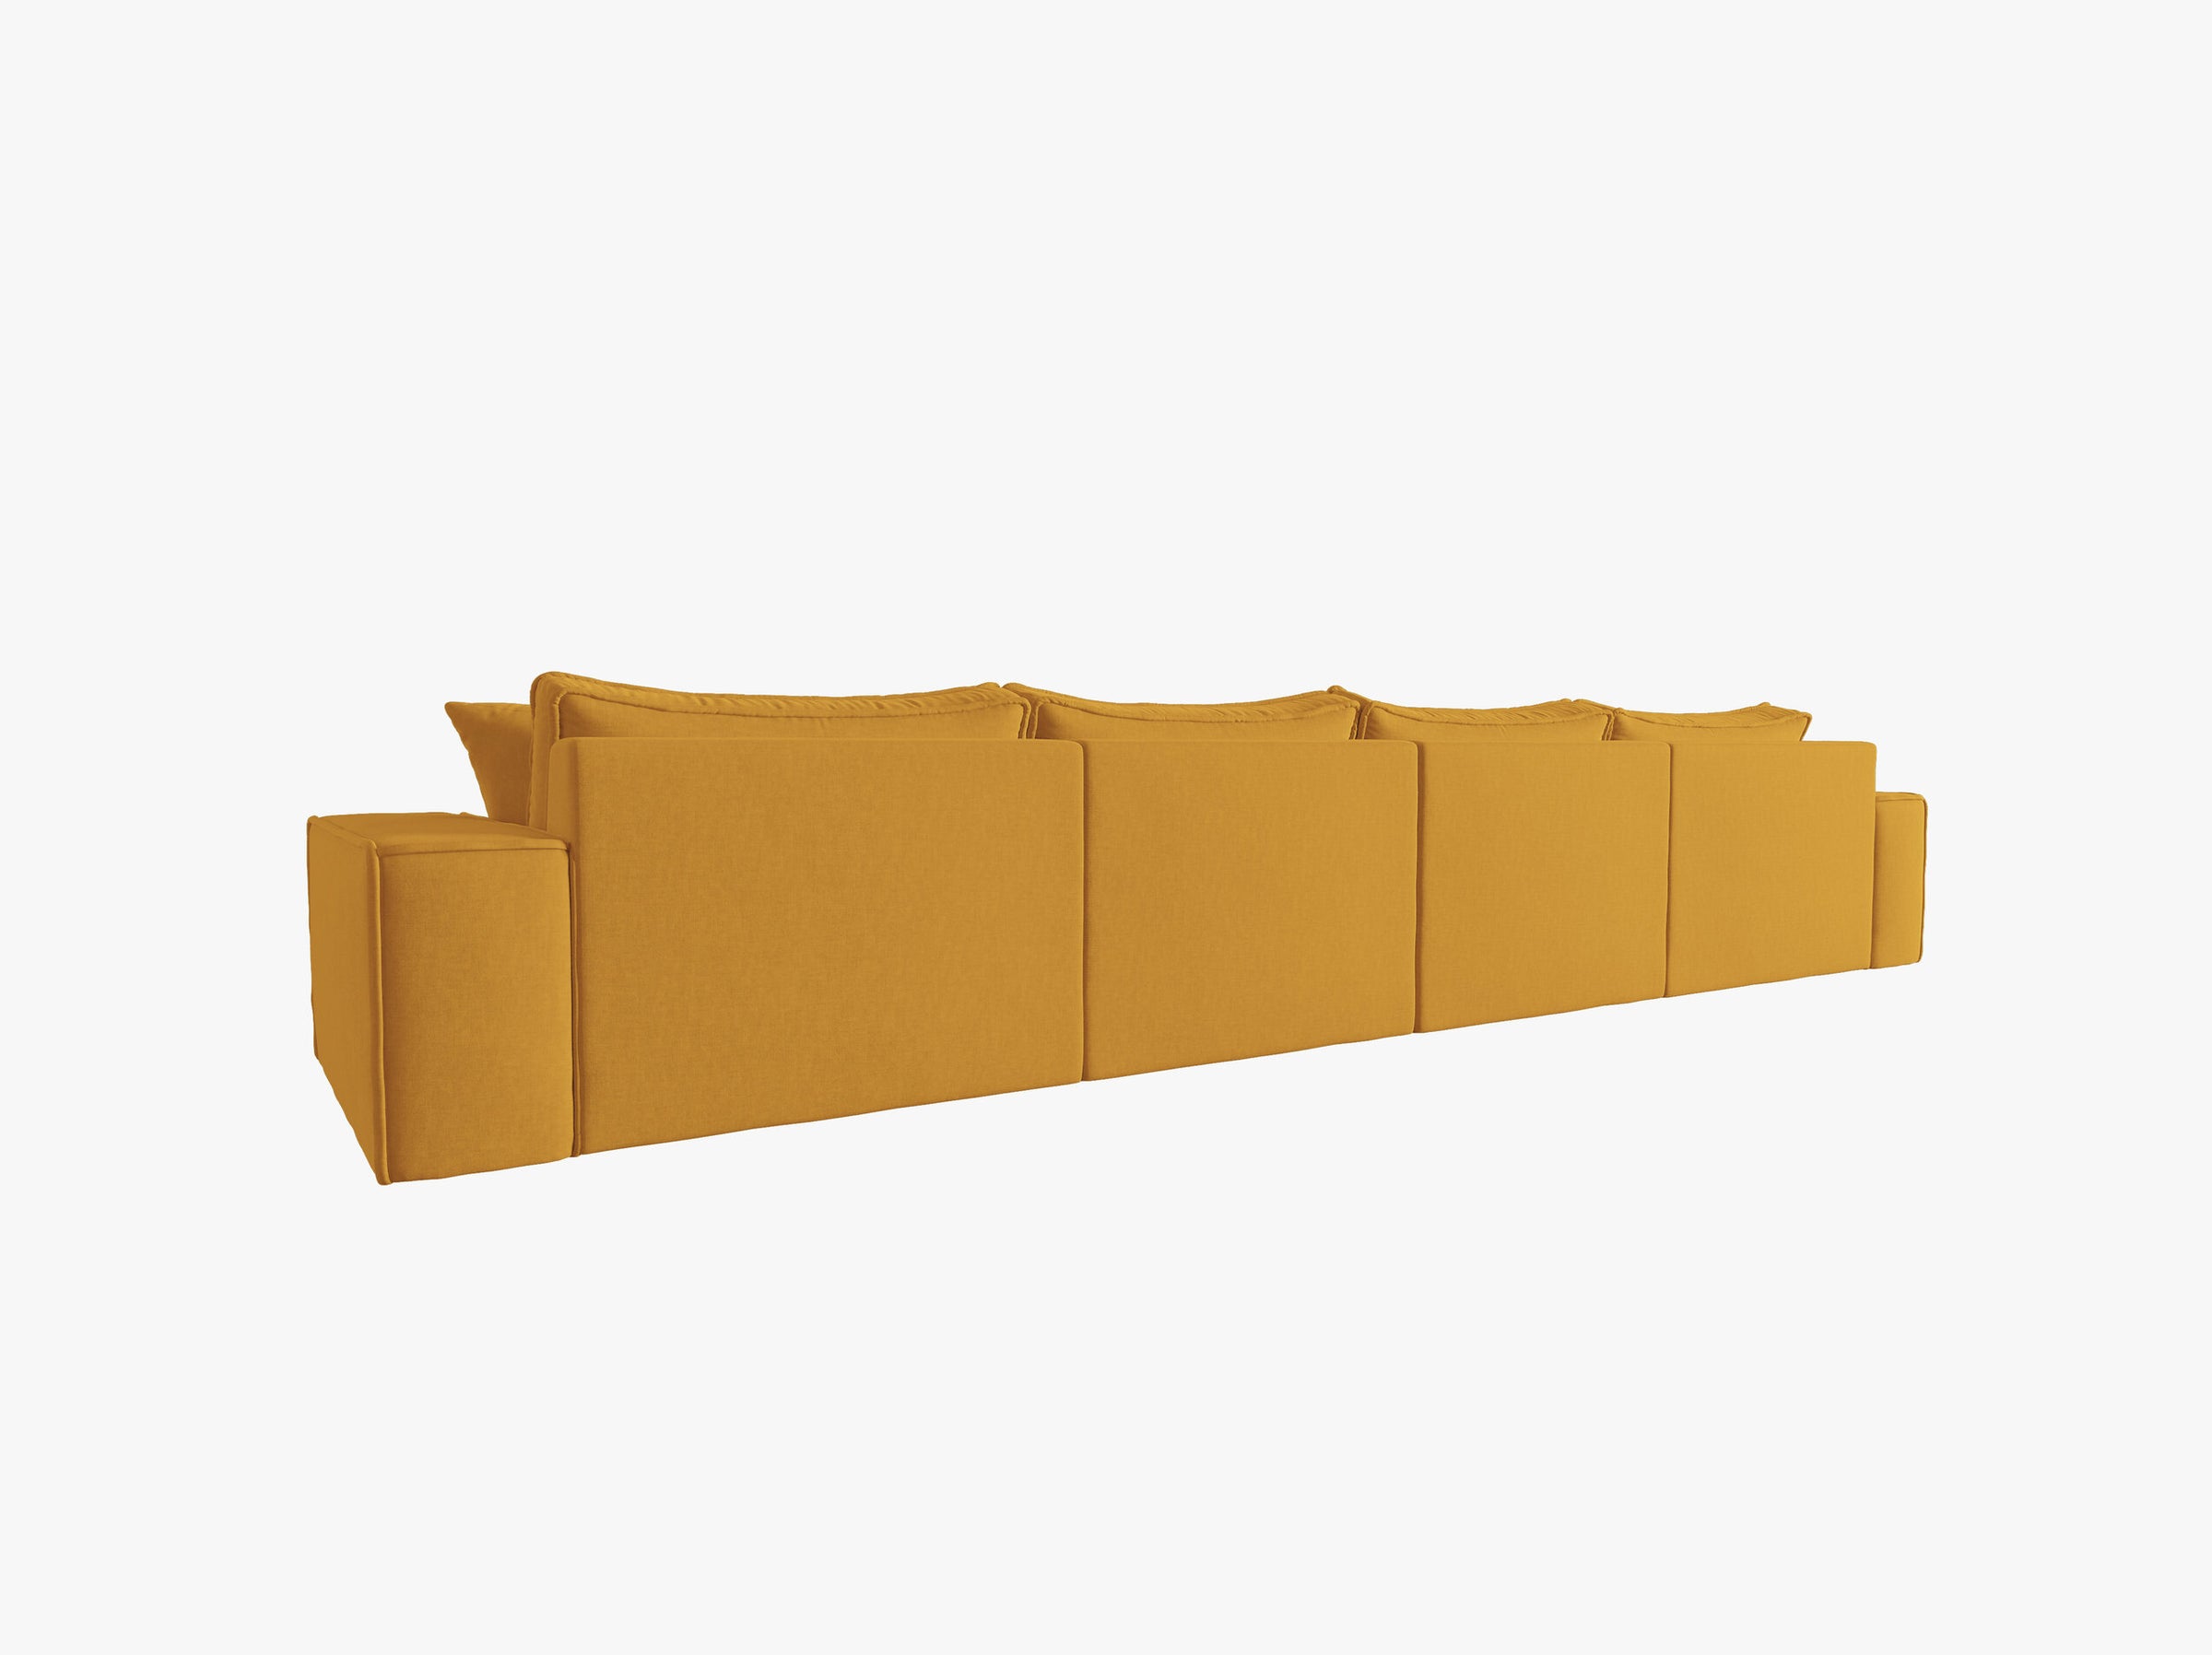 Mike Structured Fabric / Mustard 2